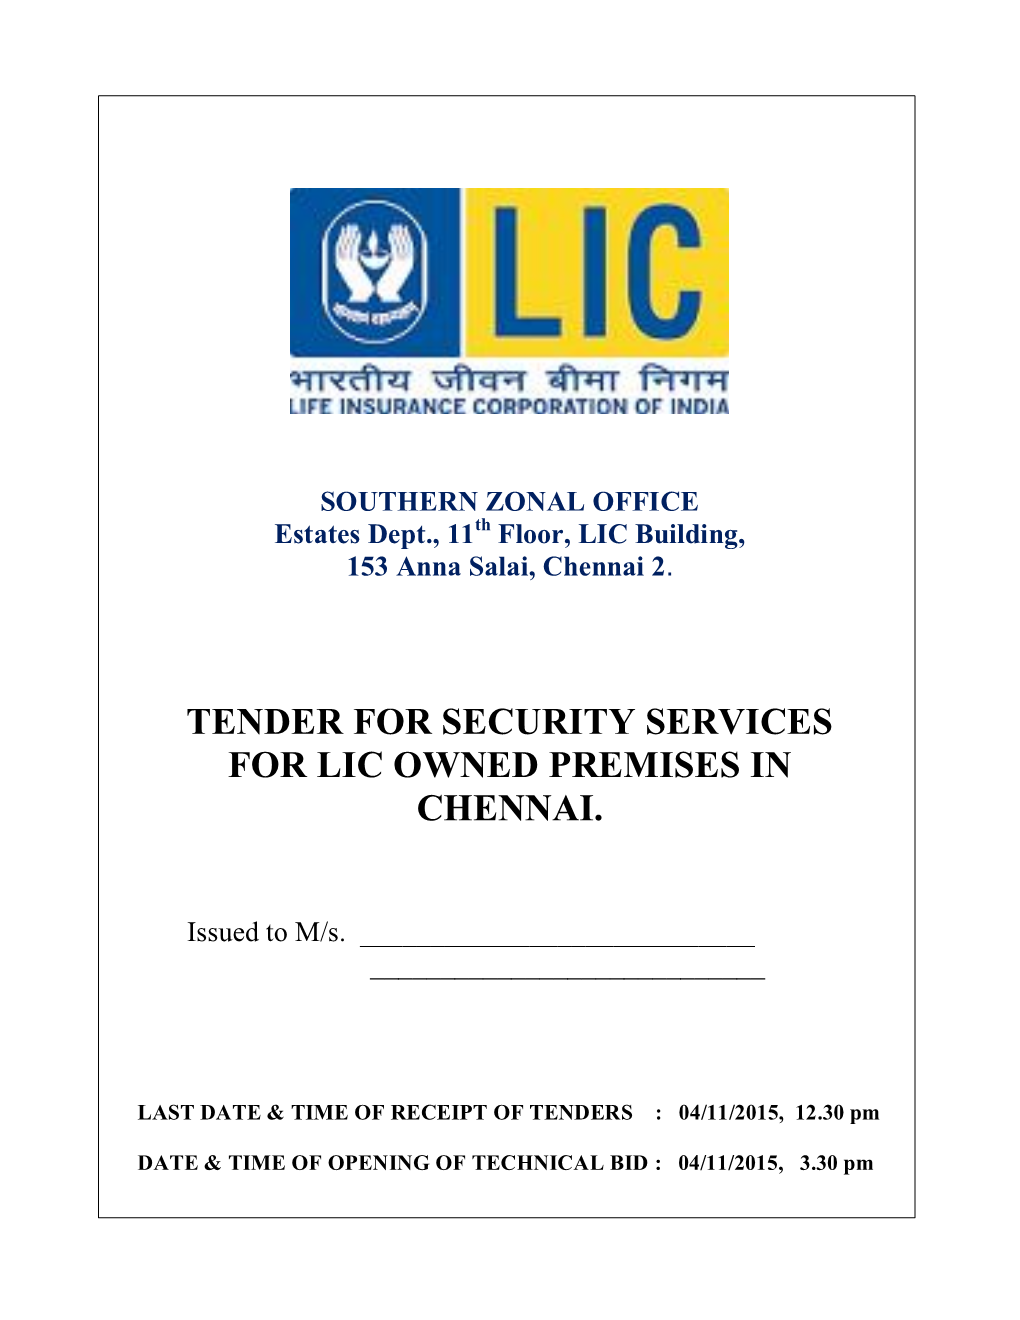 Tender for Security Services for Lic Owned Premises in Chennai